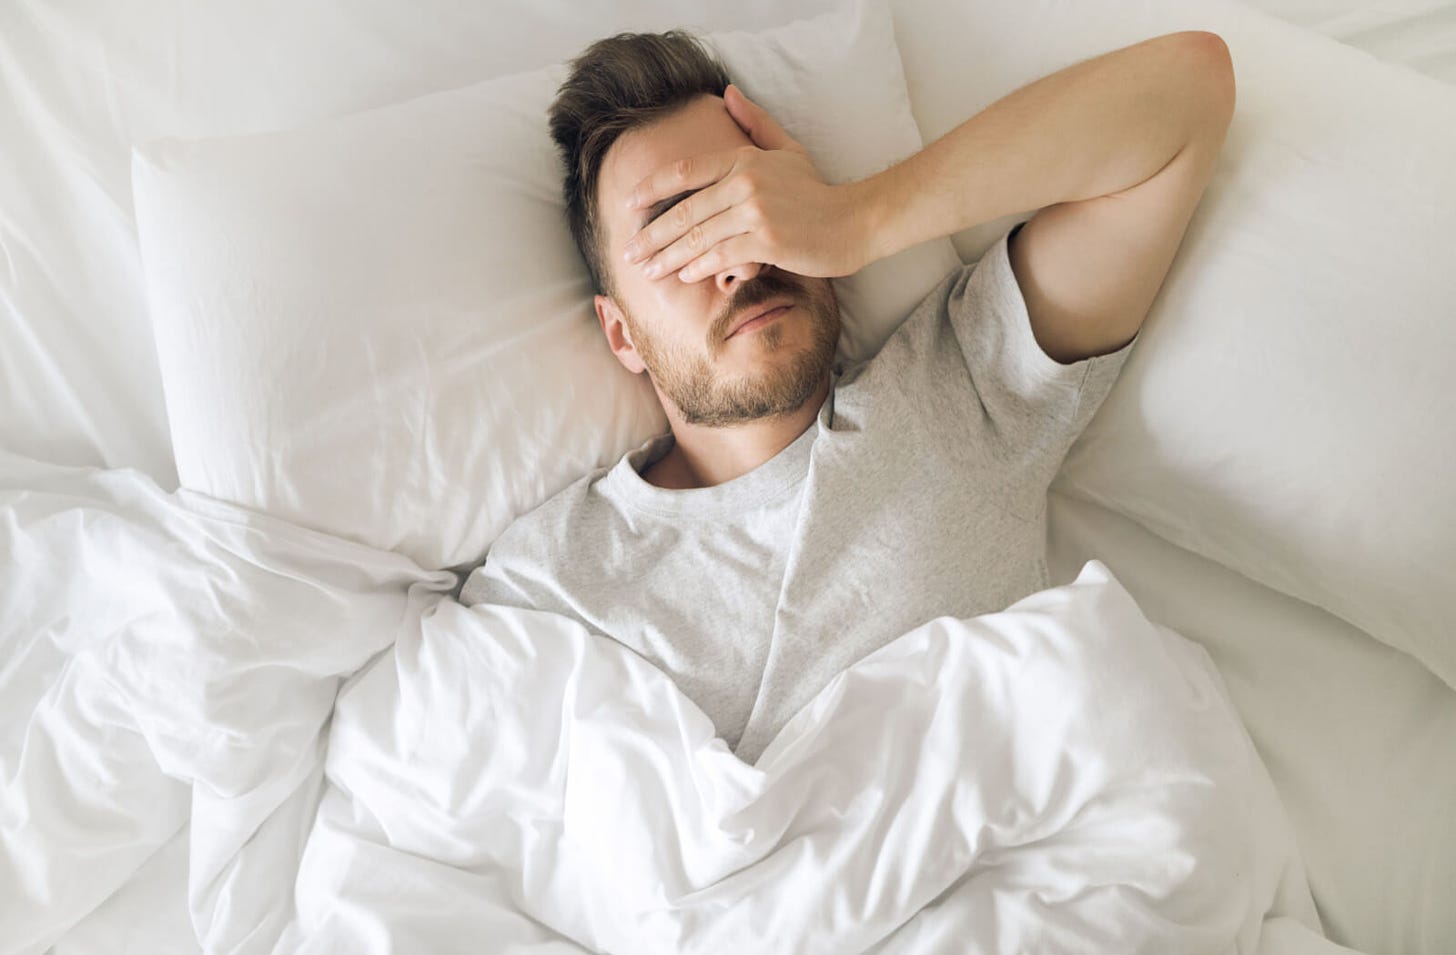 5 Tips To Prevent Waking Up With Dry Eye in the Morning